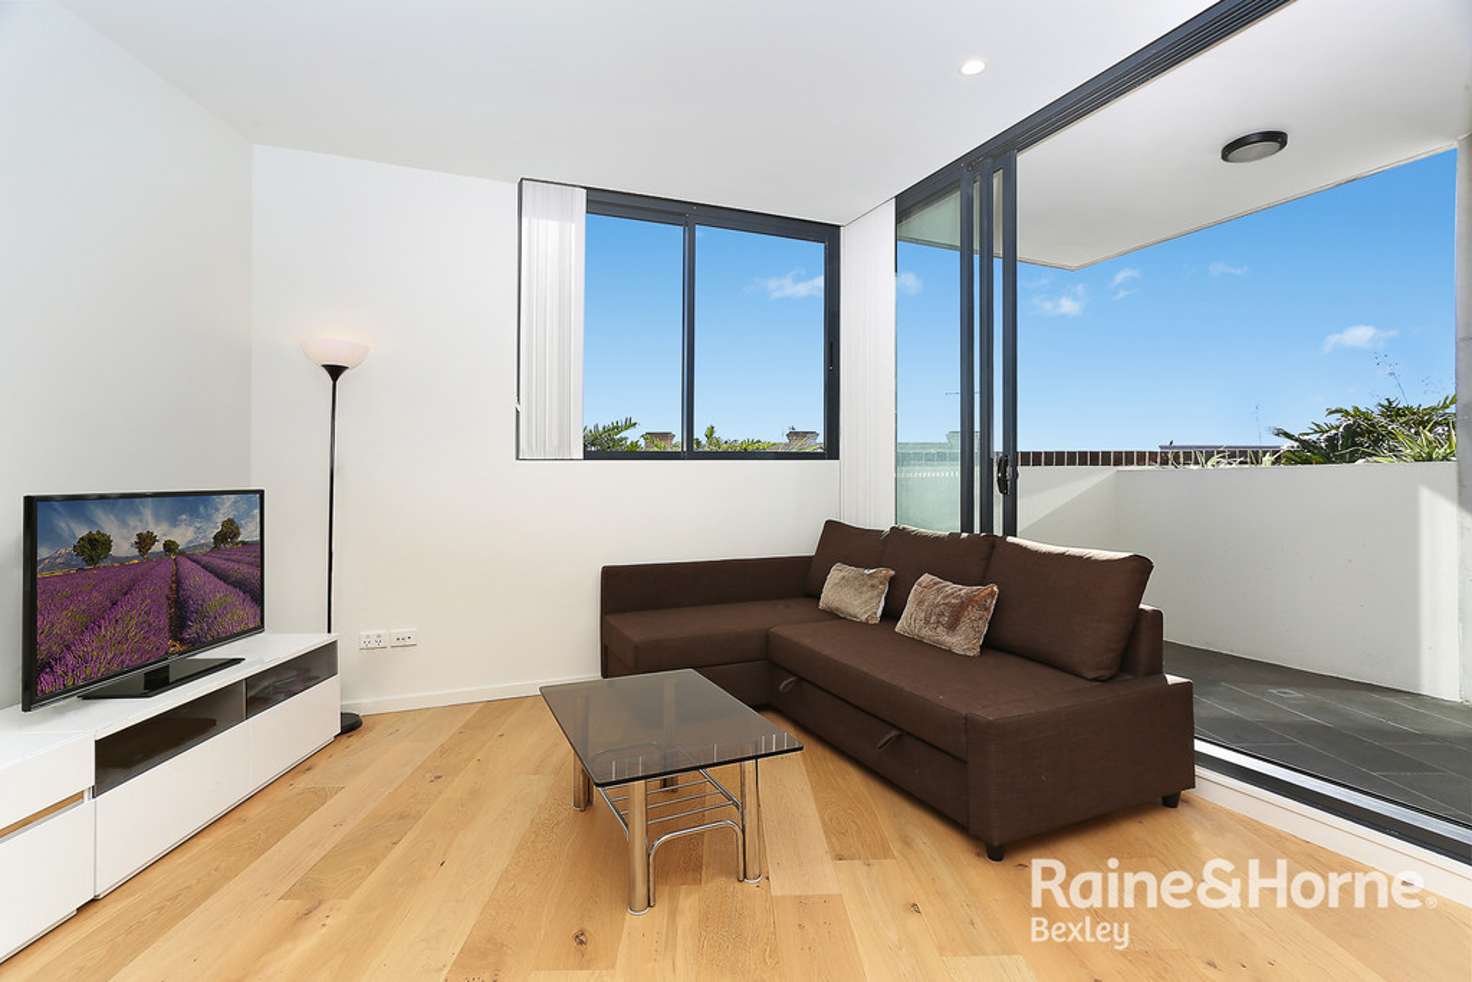 Main view of Homely apartment listing, 205/165 Frederick Street, Bexley NSW 2207